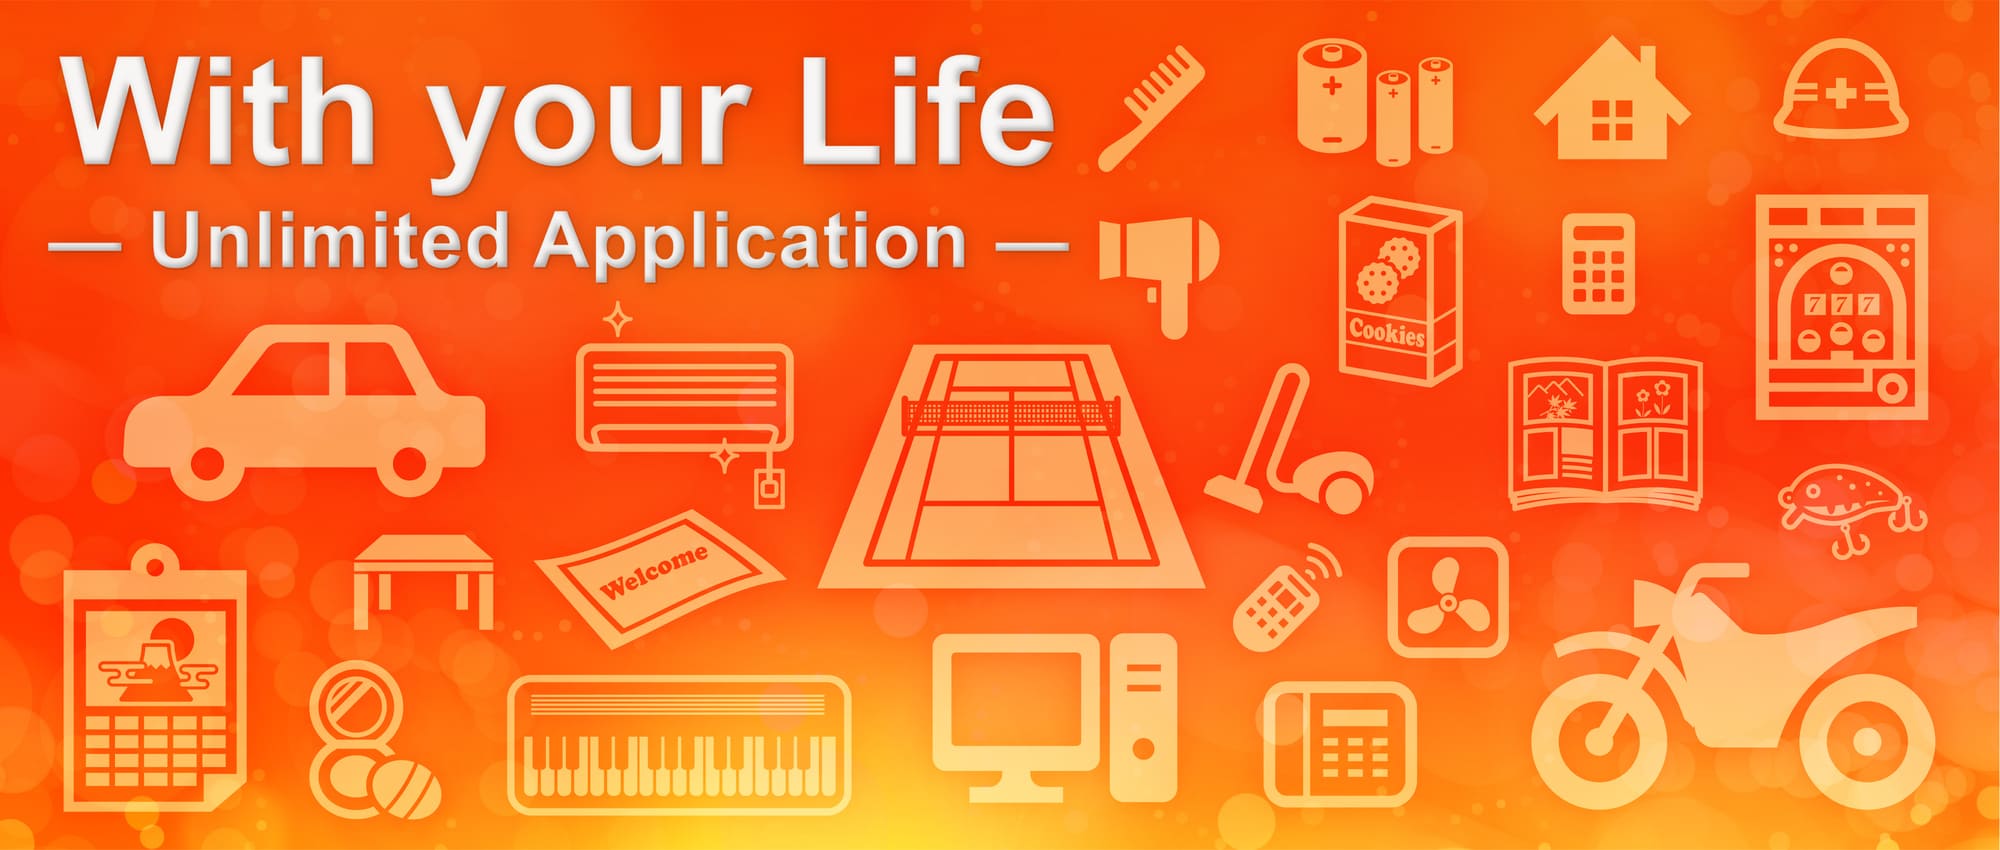 With your Life ～Unlimited Application～